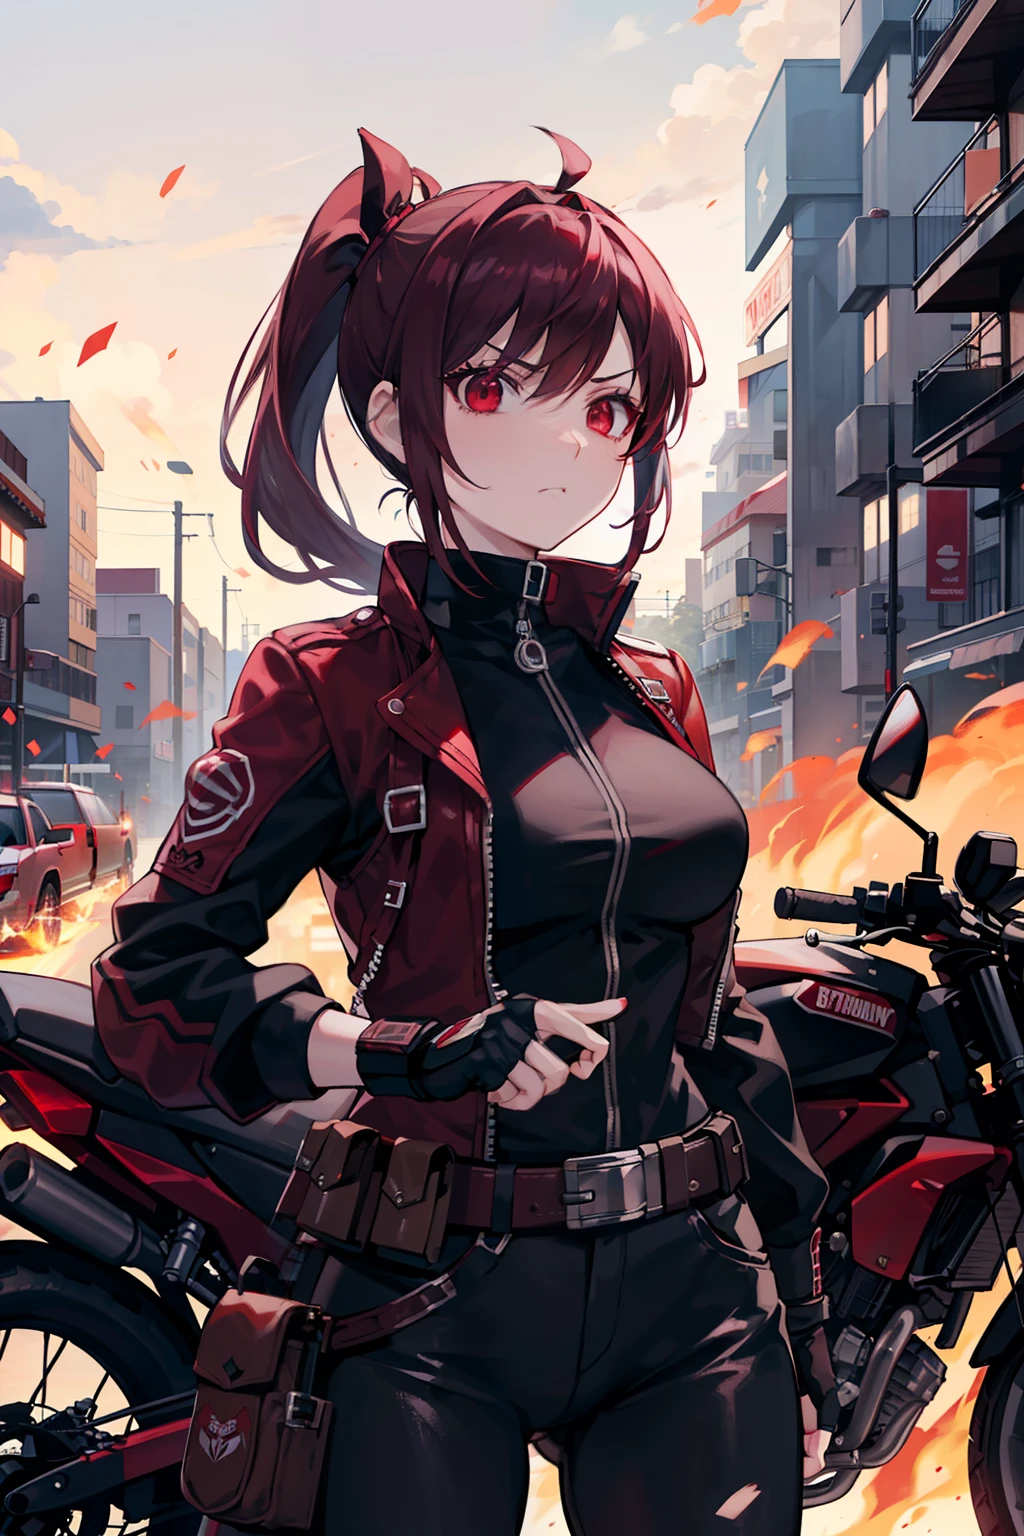 ((Burgundy ponytail)), red eyes, frustrated face, tactical motorcycle outfit, motorcycle, mechanic, fingerless gloves, lush hips, silver belts, silver straps, buckles, guns, machine gun on her back, fire, balls of fire floating around her, in a city with lava